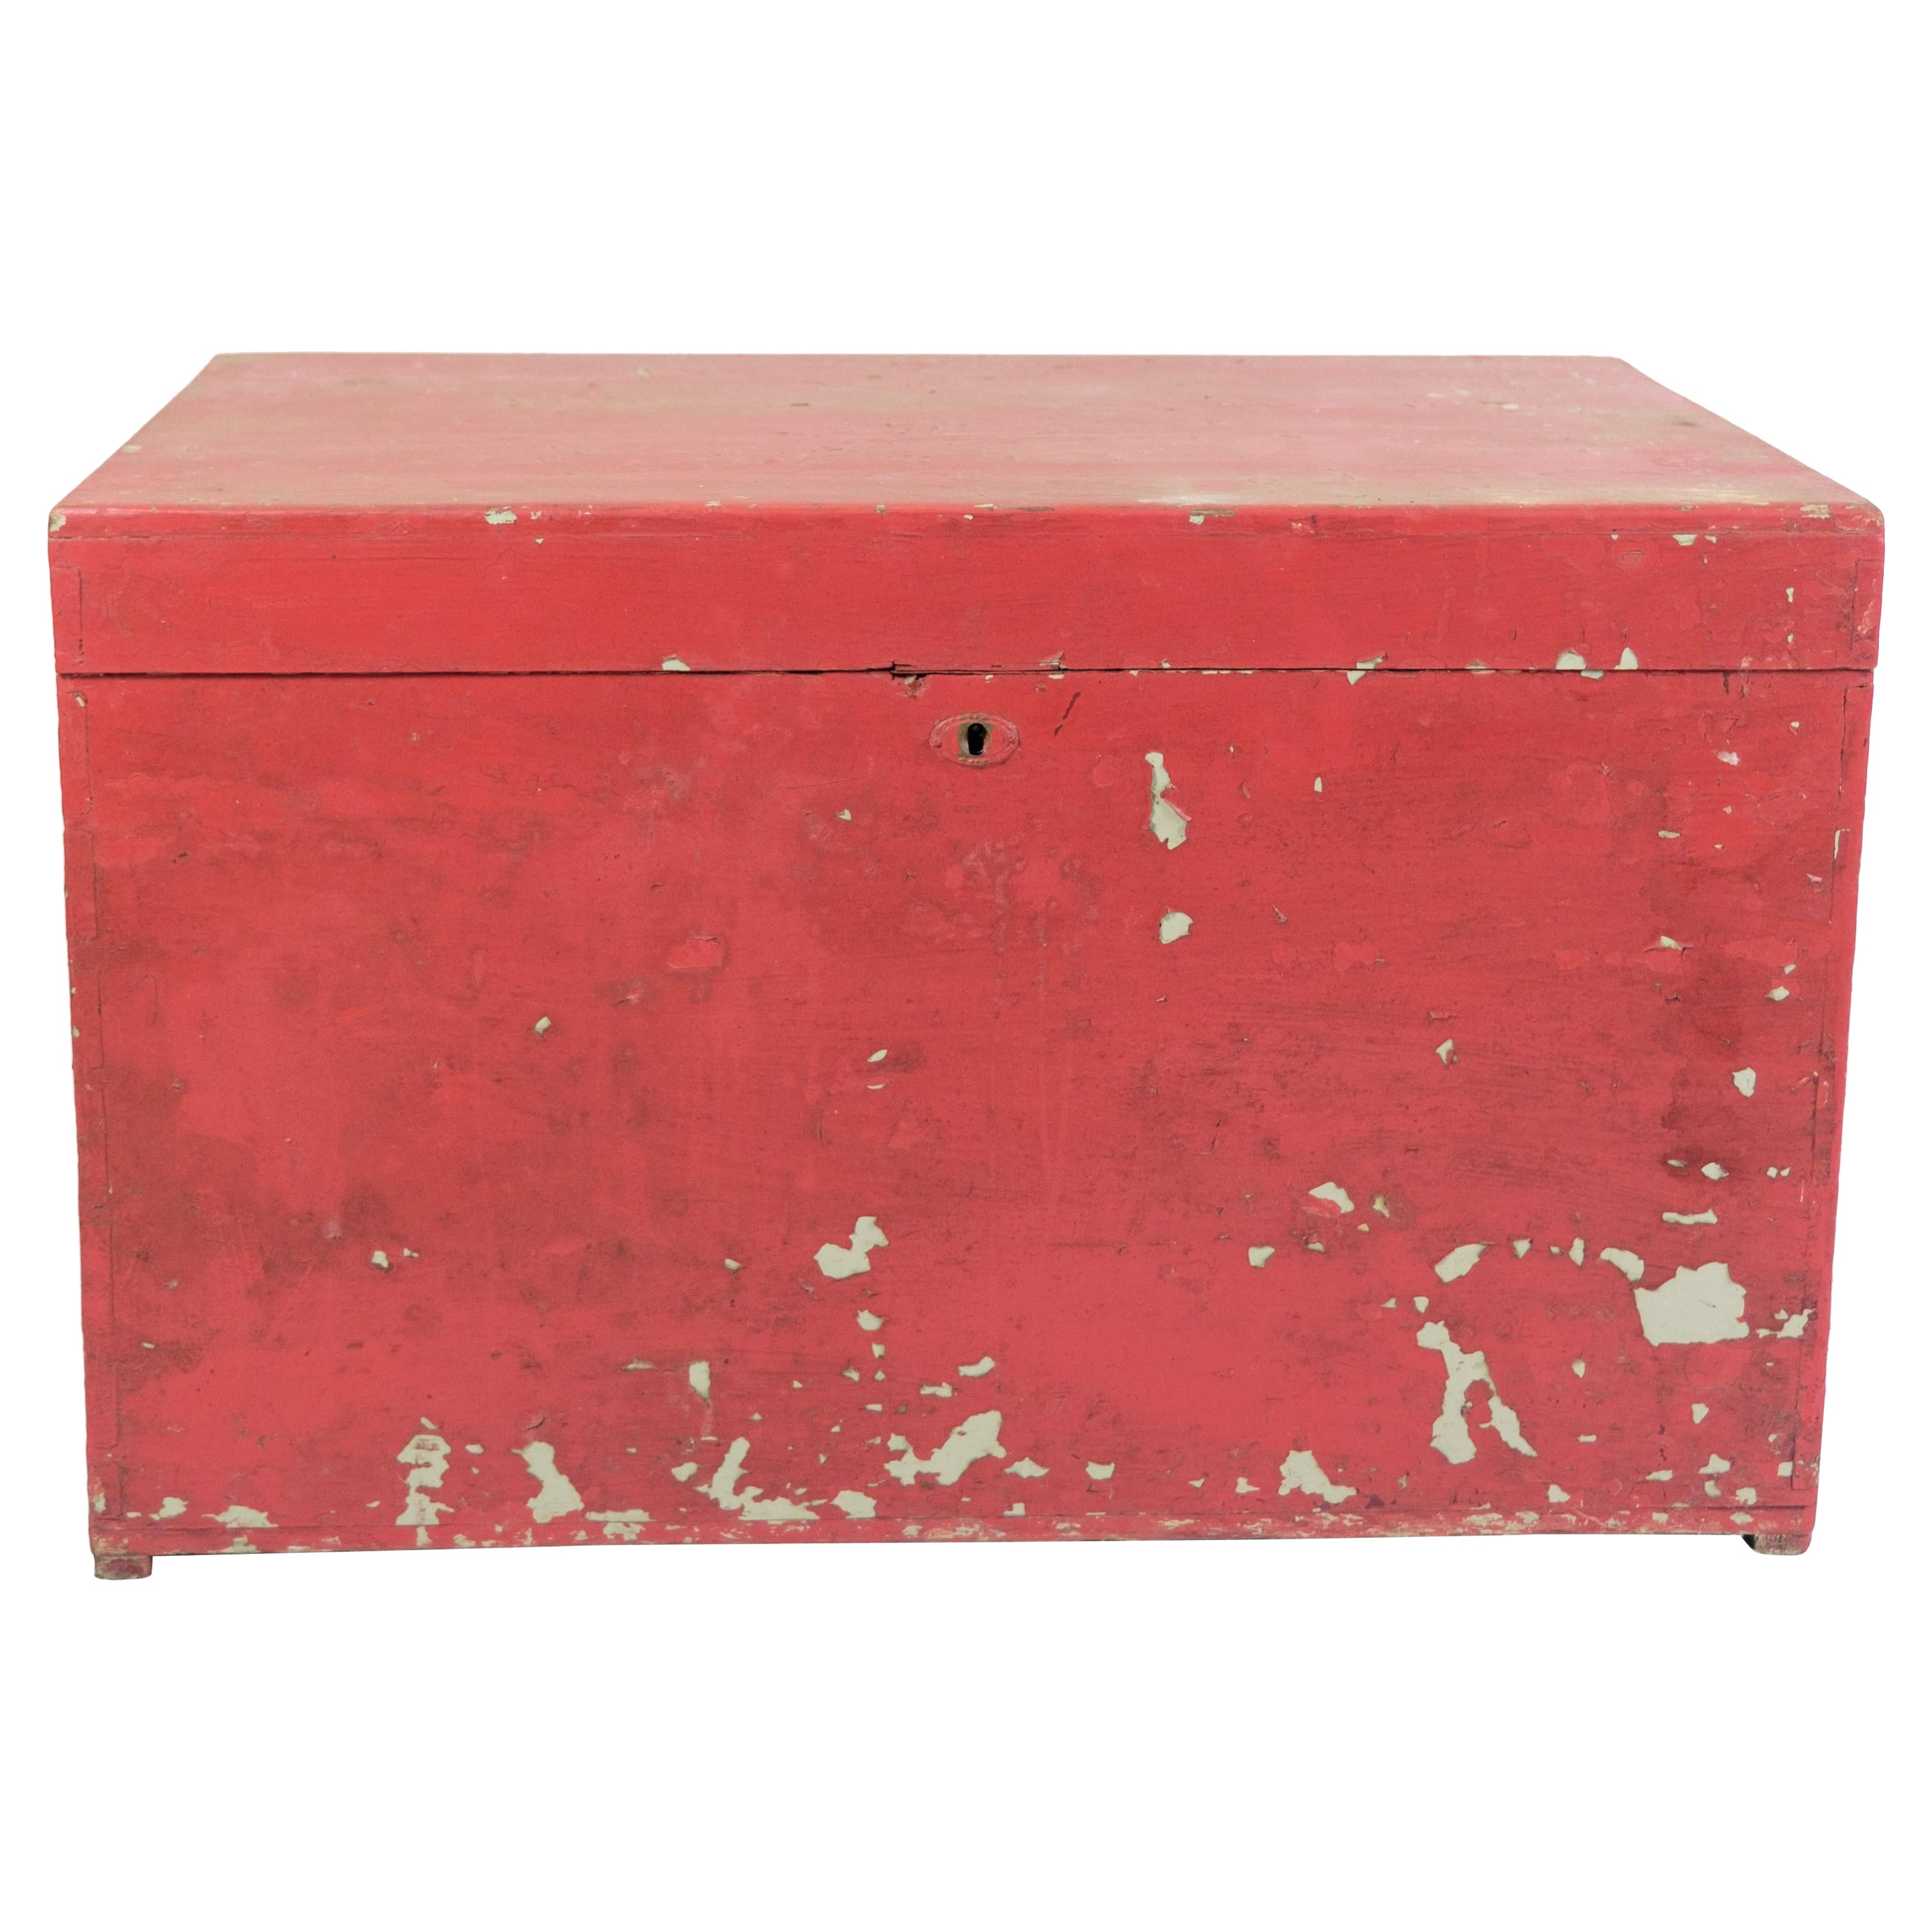 Antique Red Painted Chest From 1830s